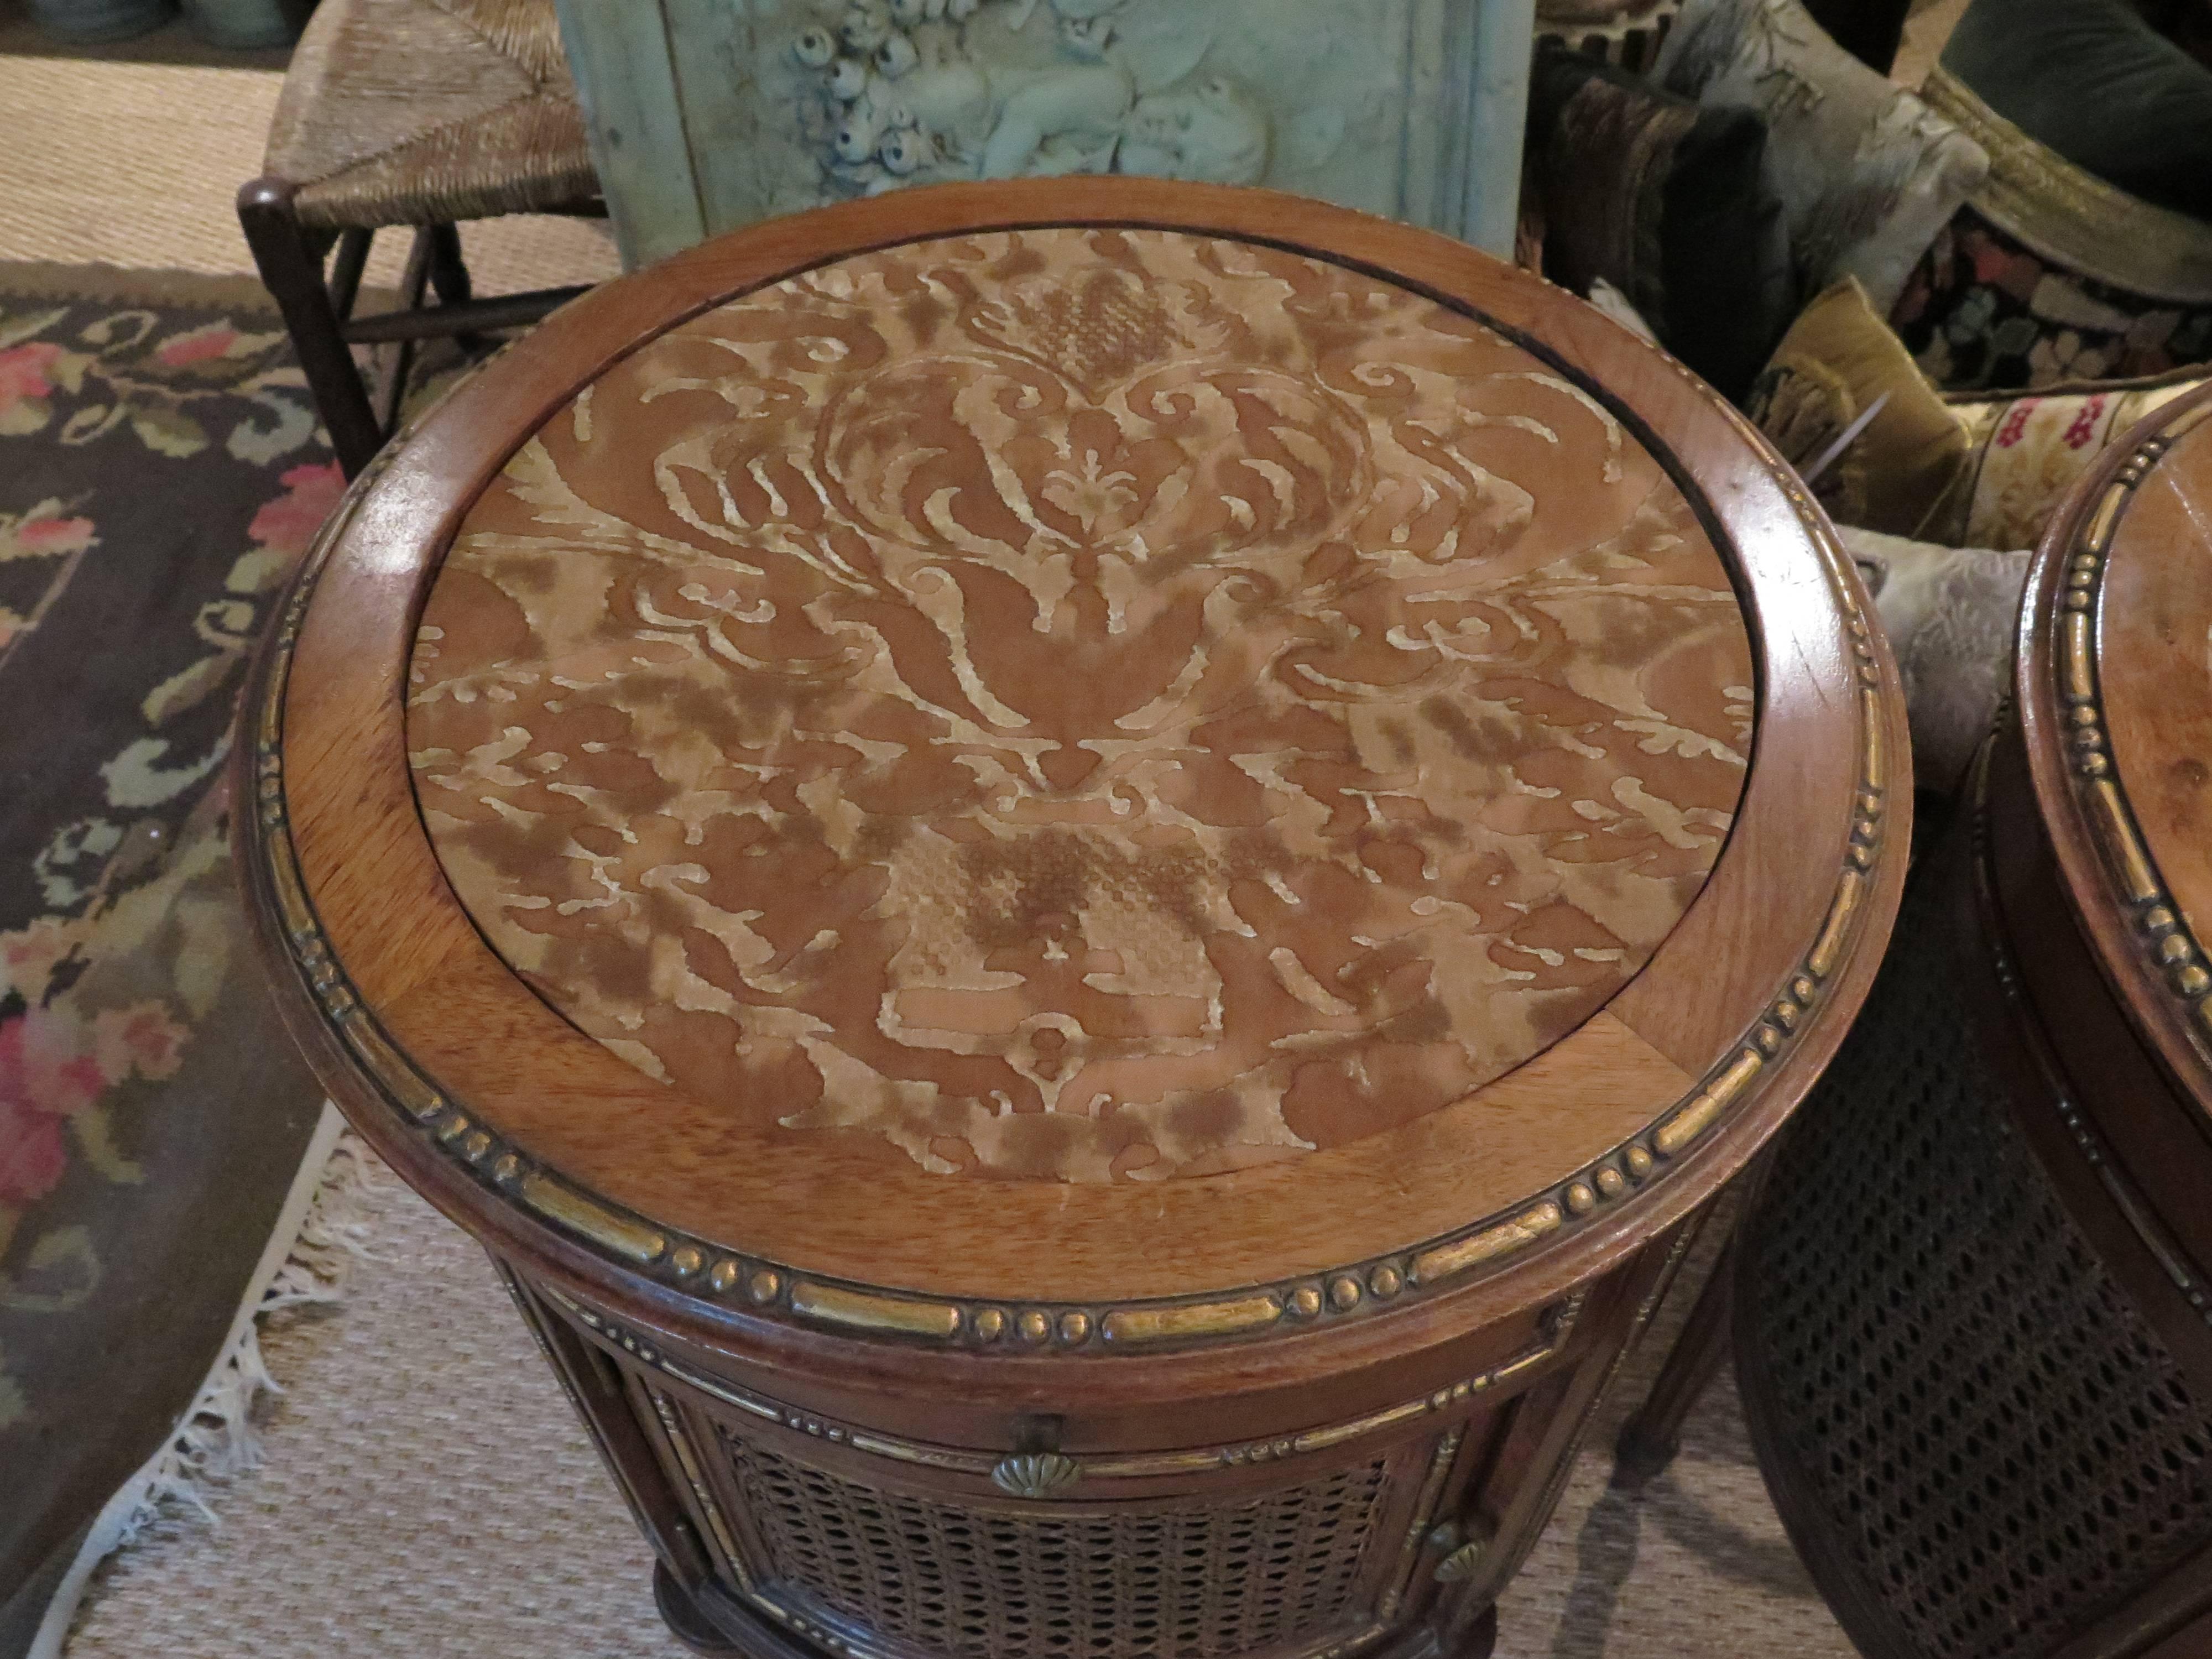 Louis XVI style parcel-gilt pair of end tables with beautiful carved parcel-gilt details and caning. Top is upholstered in Fortuny fabric. Nightstands come with glass tops that are not in most of the pictures due to reflection.